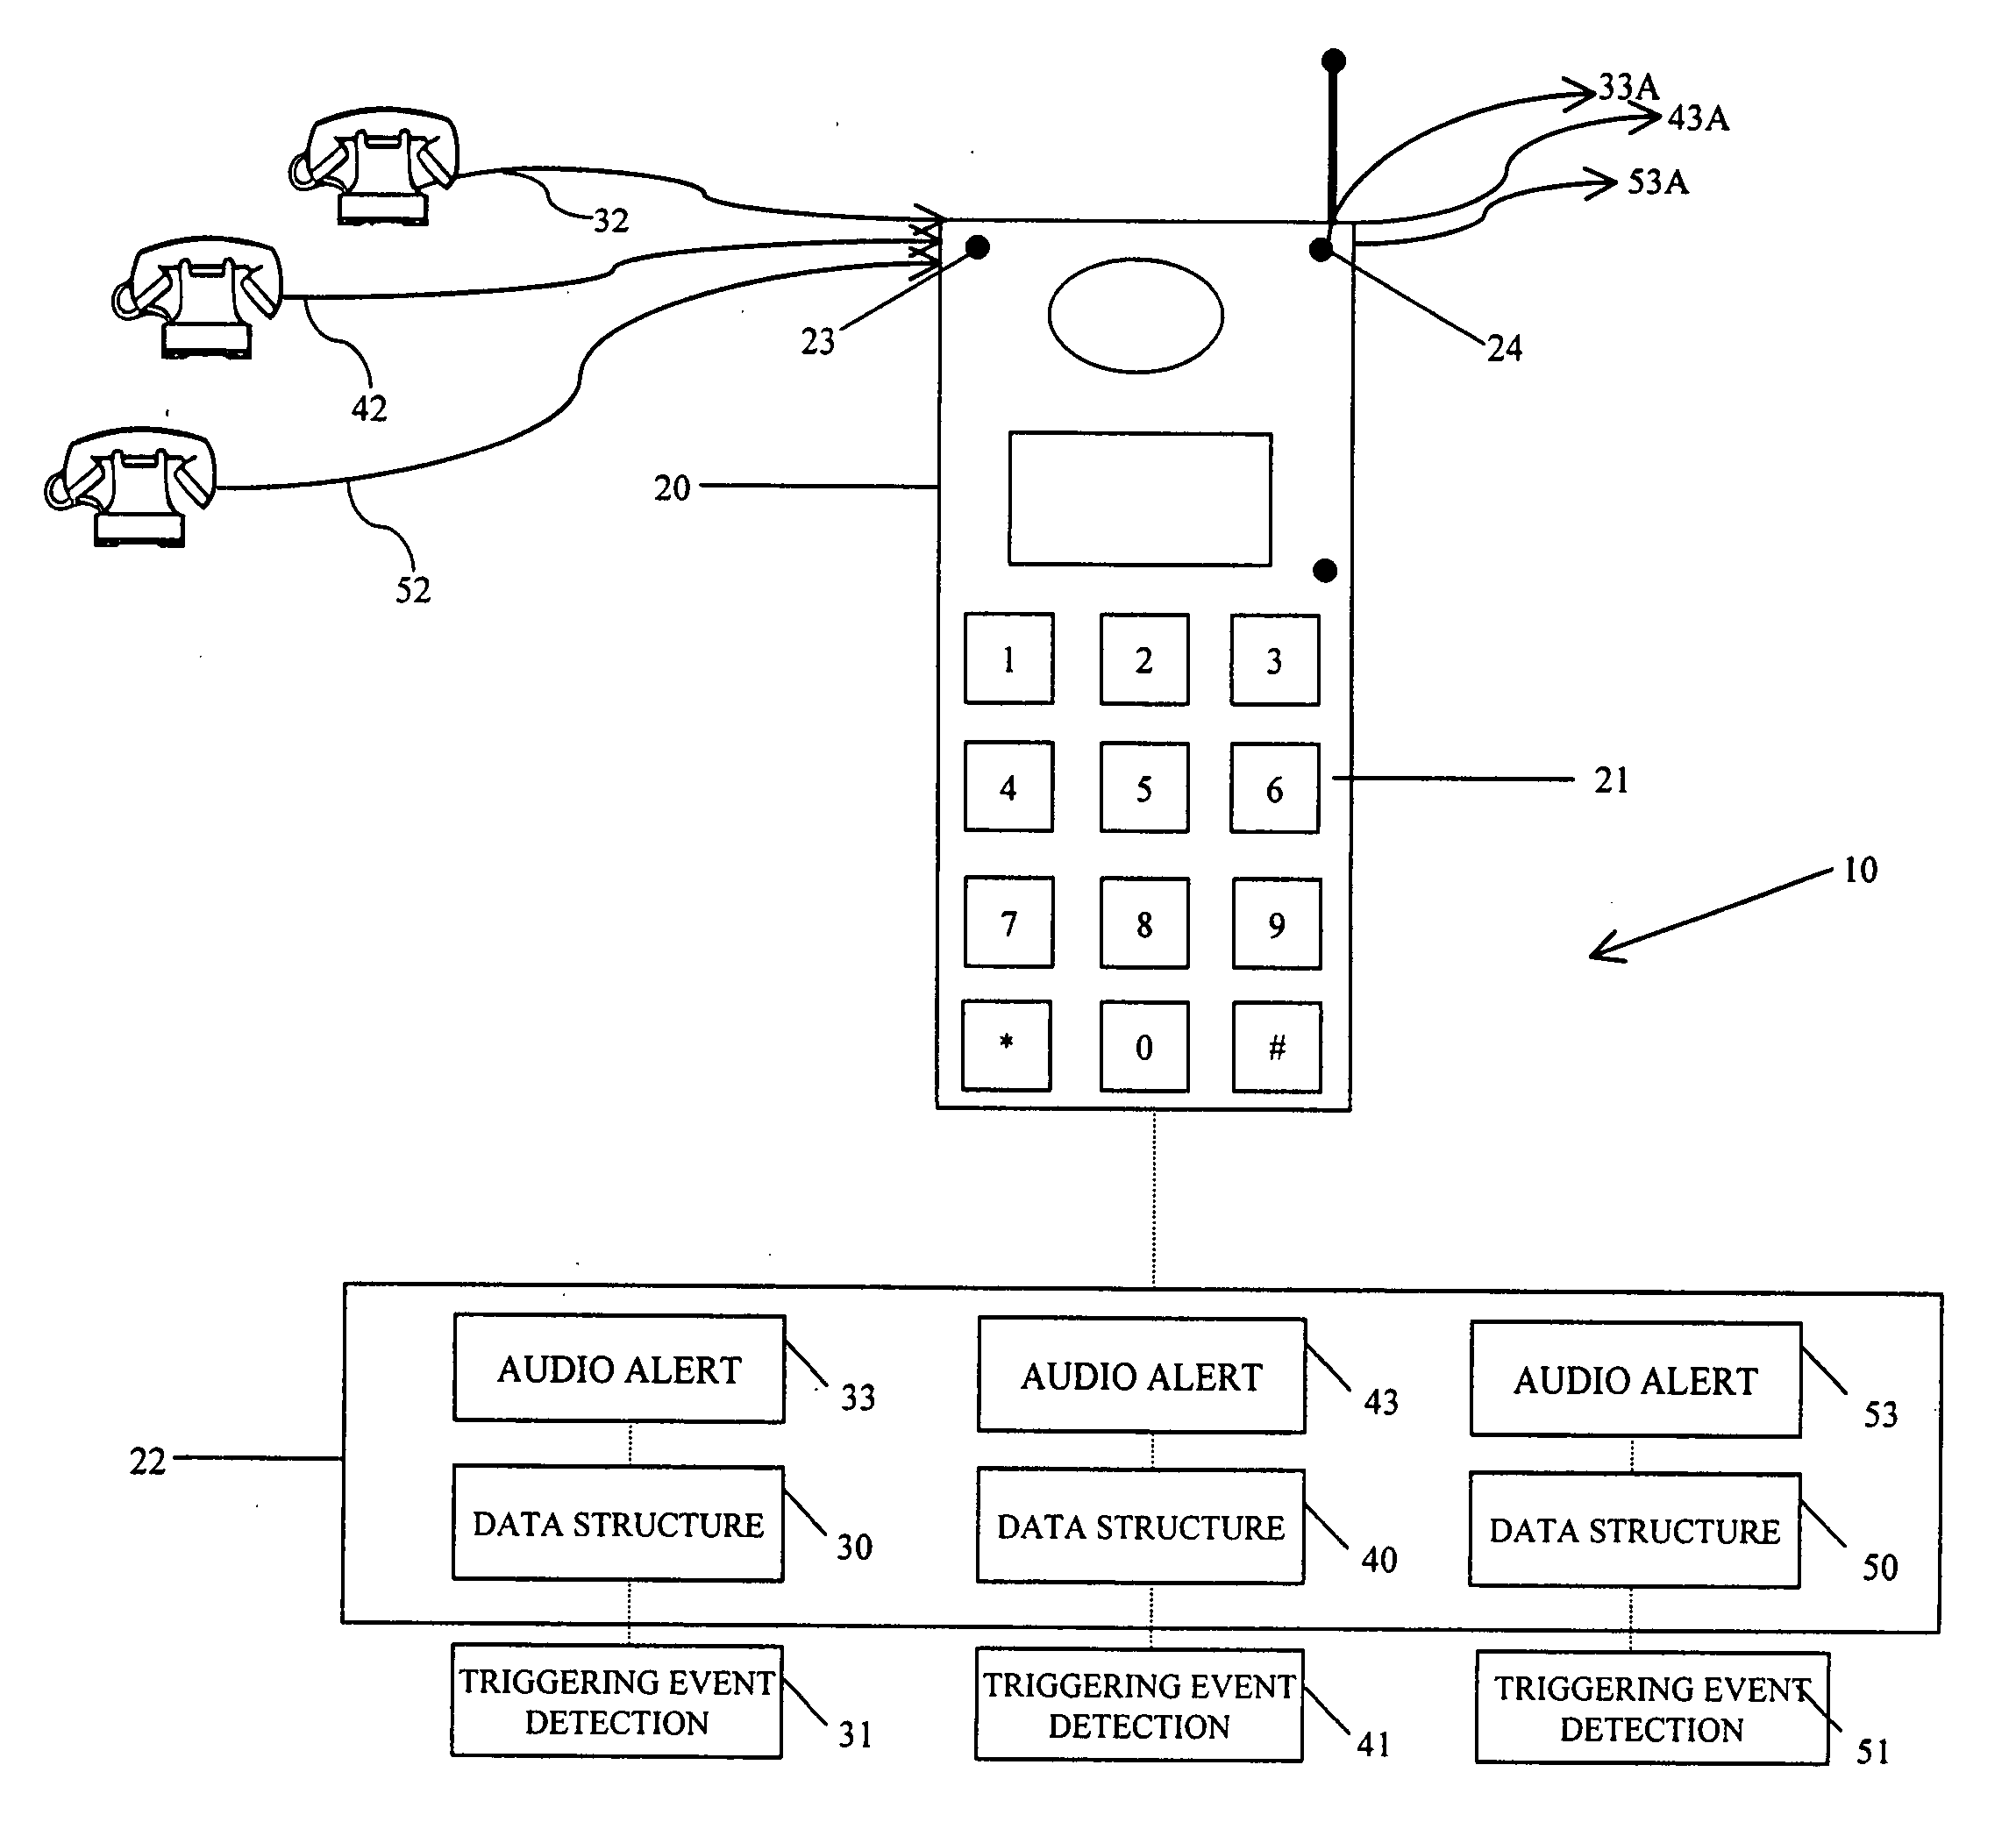 Programmable audio alert system and method